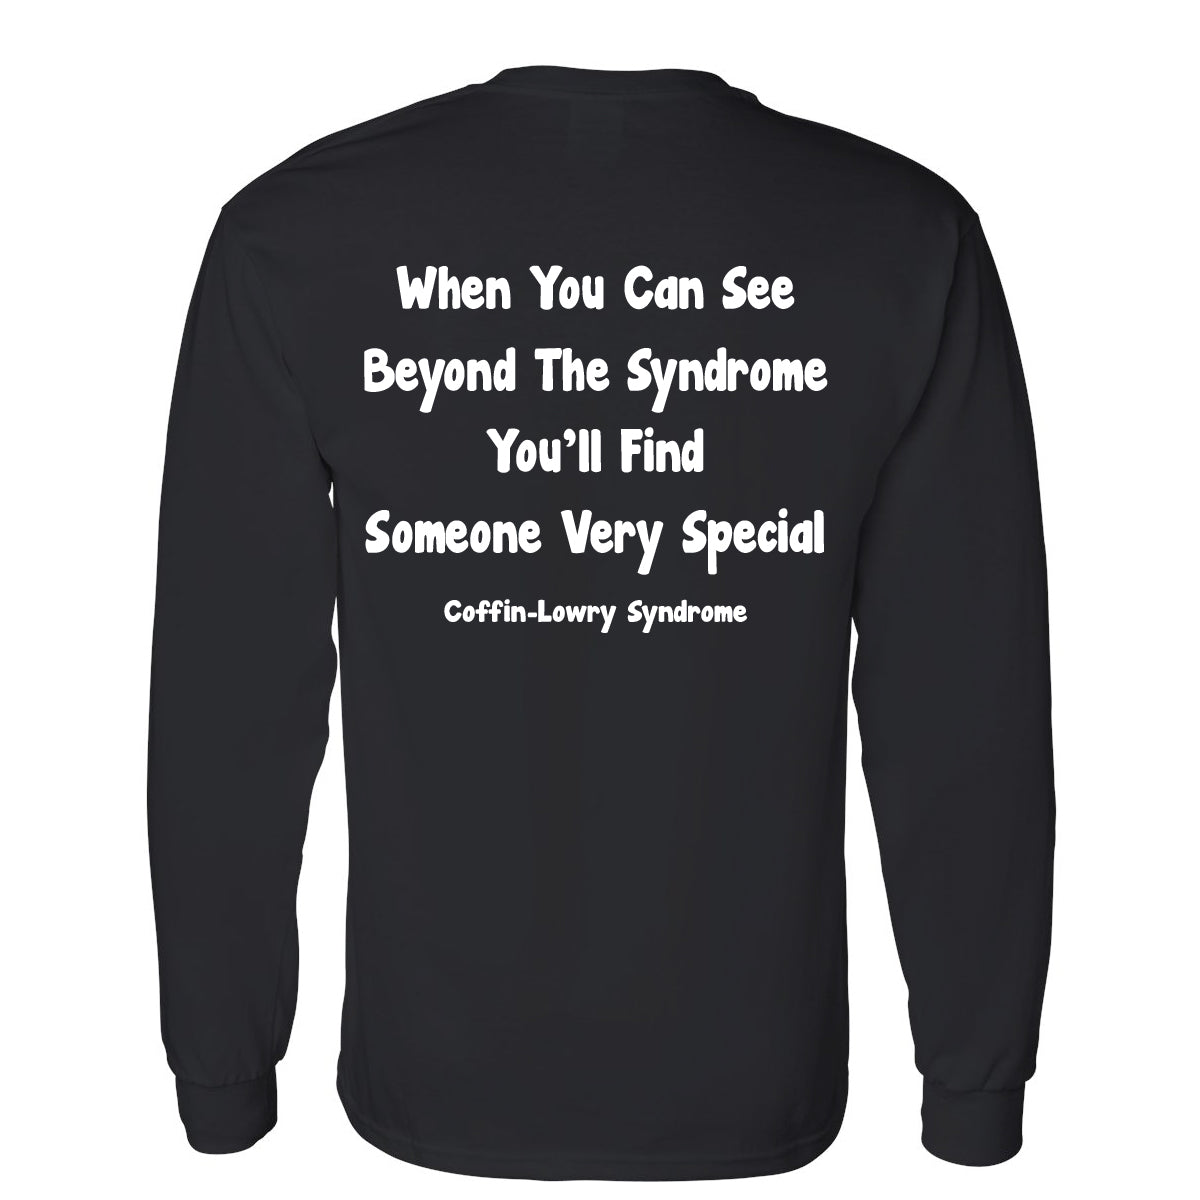 Coffin-Lowry Syndrome T-Shirts (ADULT LONG SLEEVE)